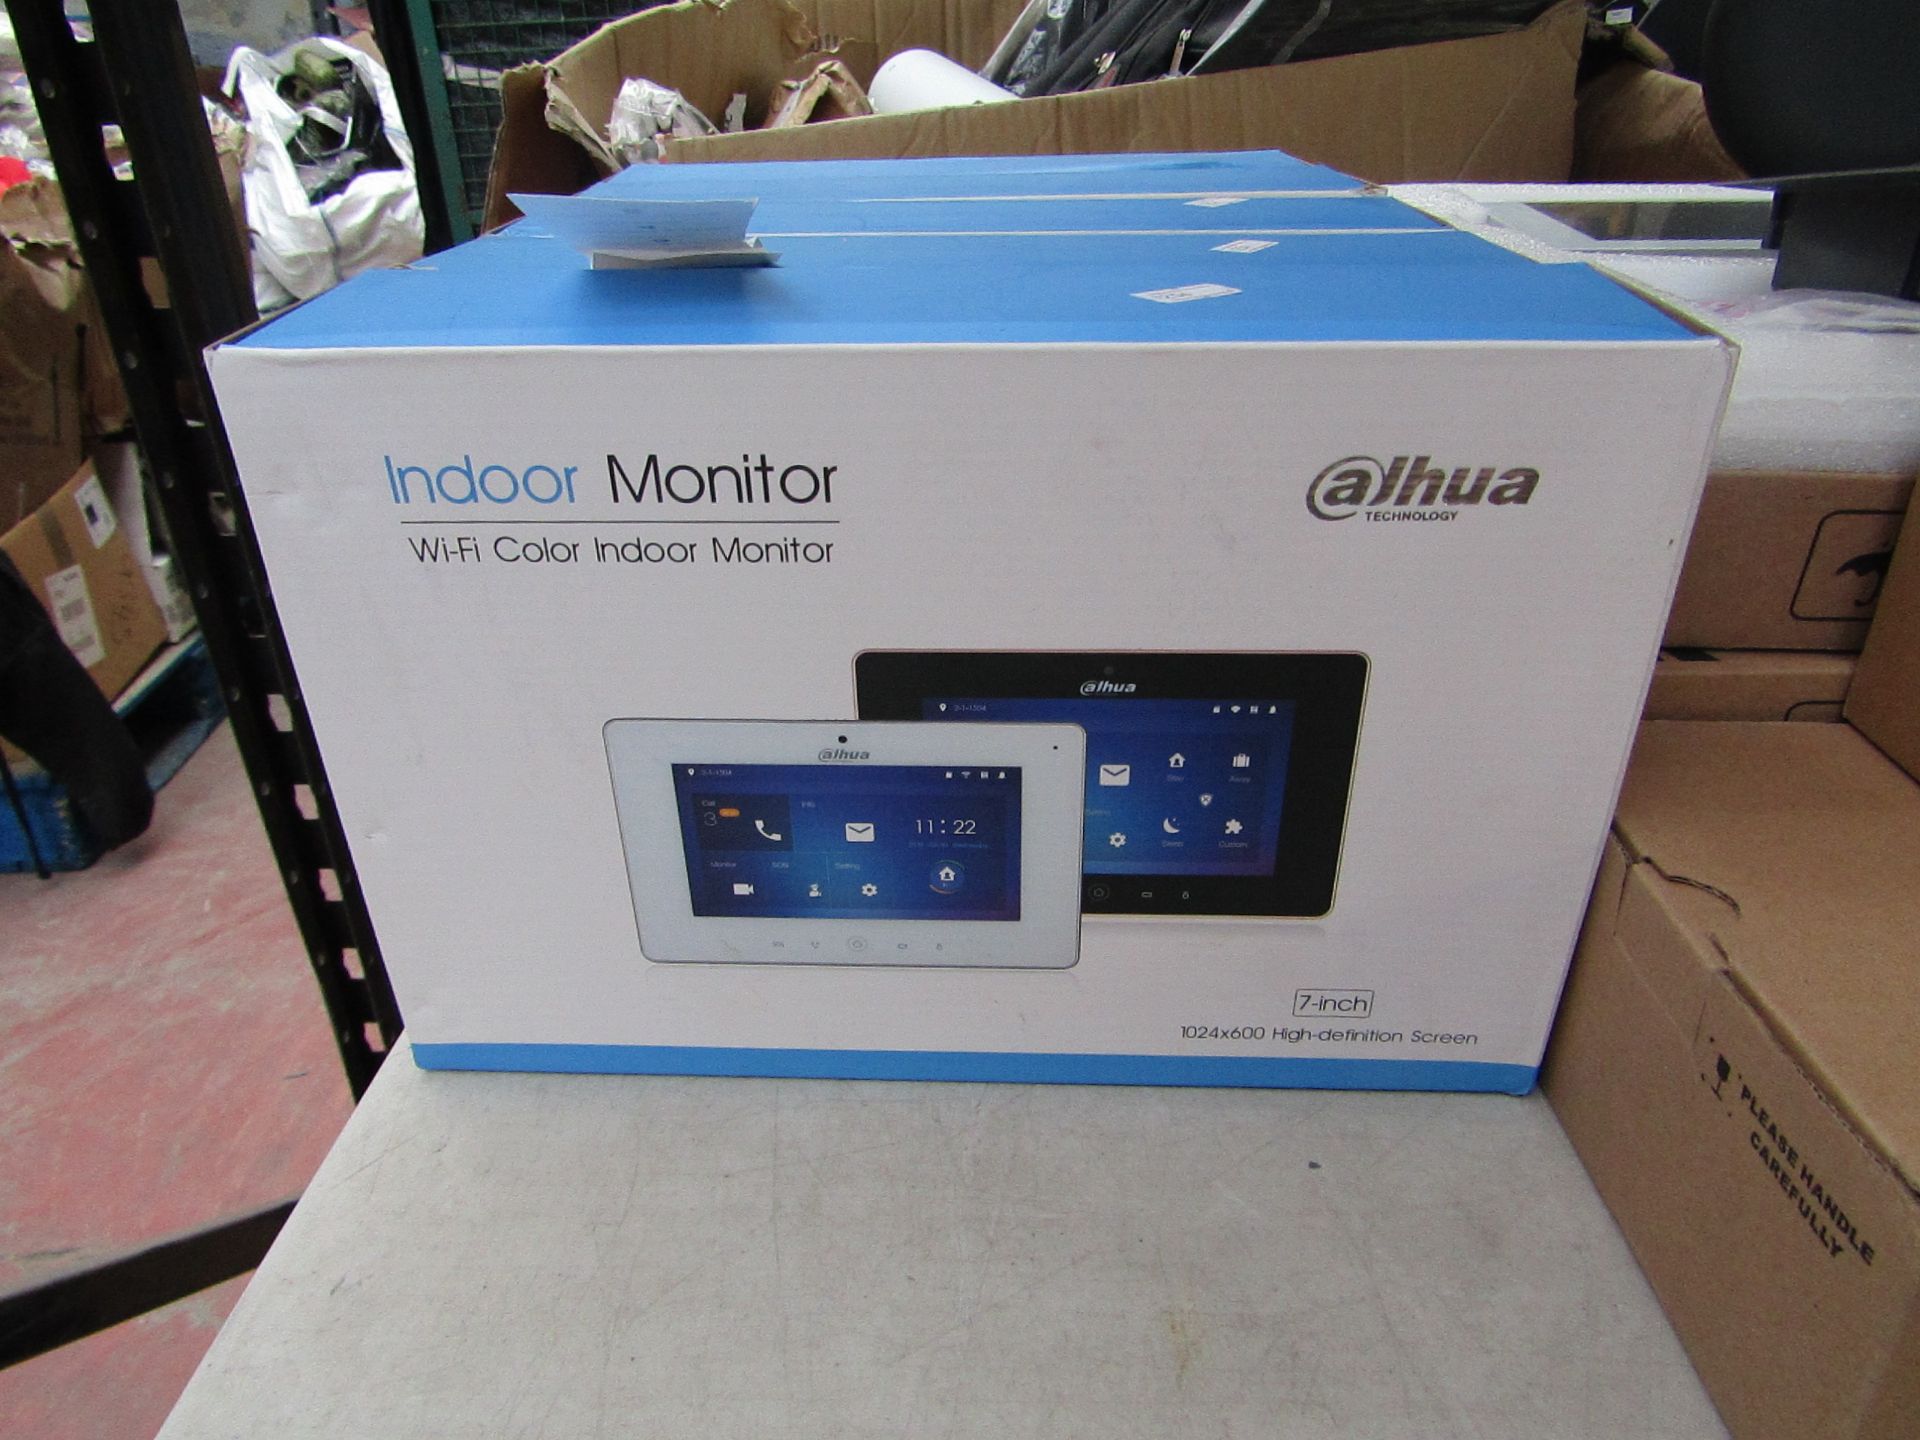 Dahua 1024 x 600 7" WiFi colour indoor monitor, compatible with wireless or wired network cameras